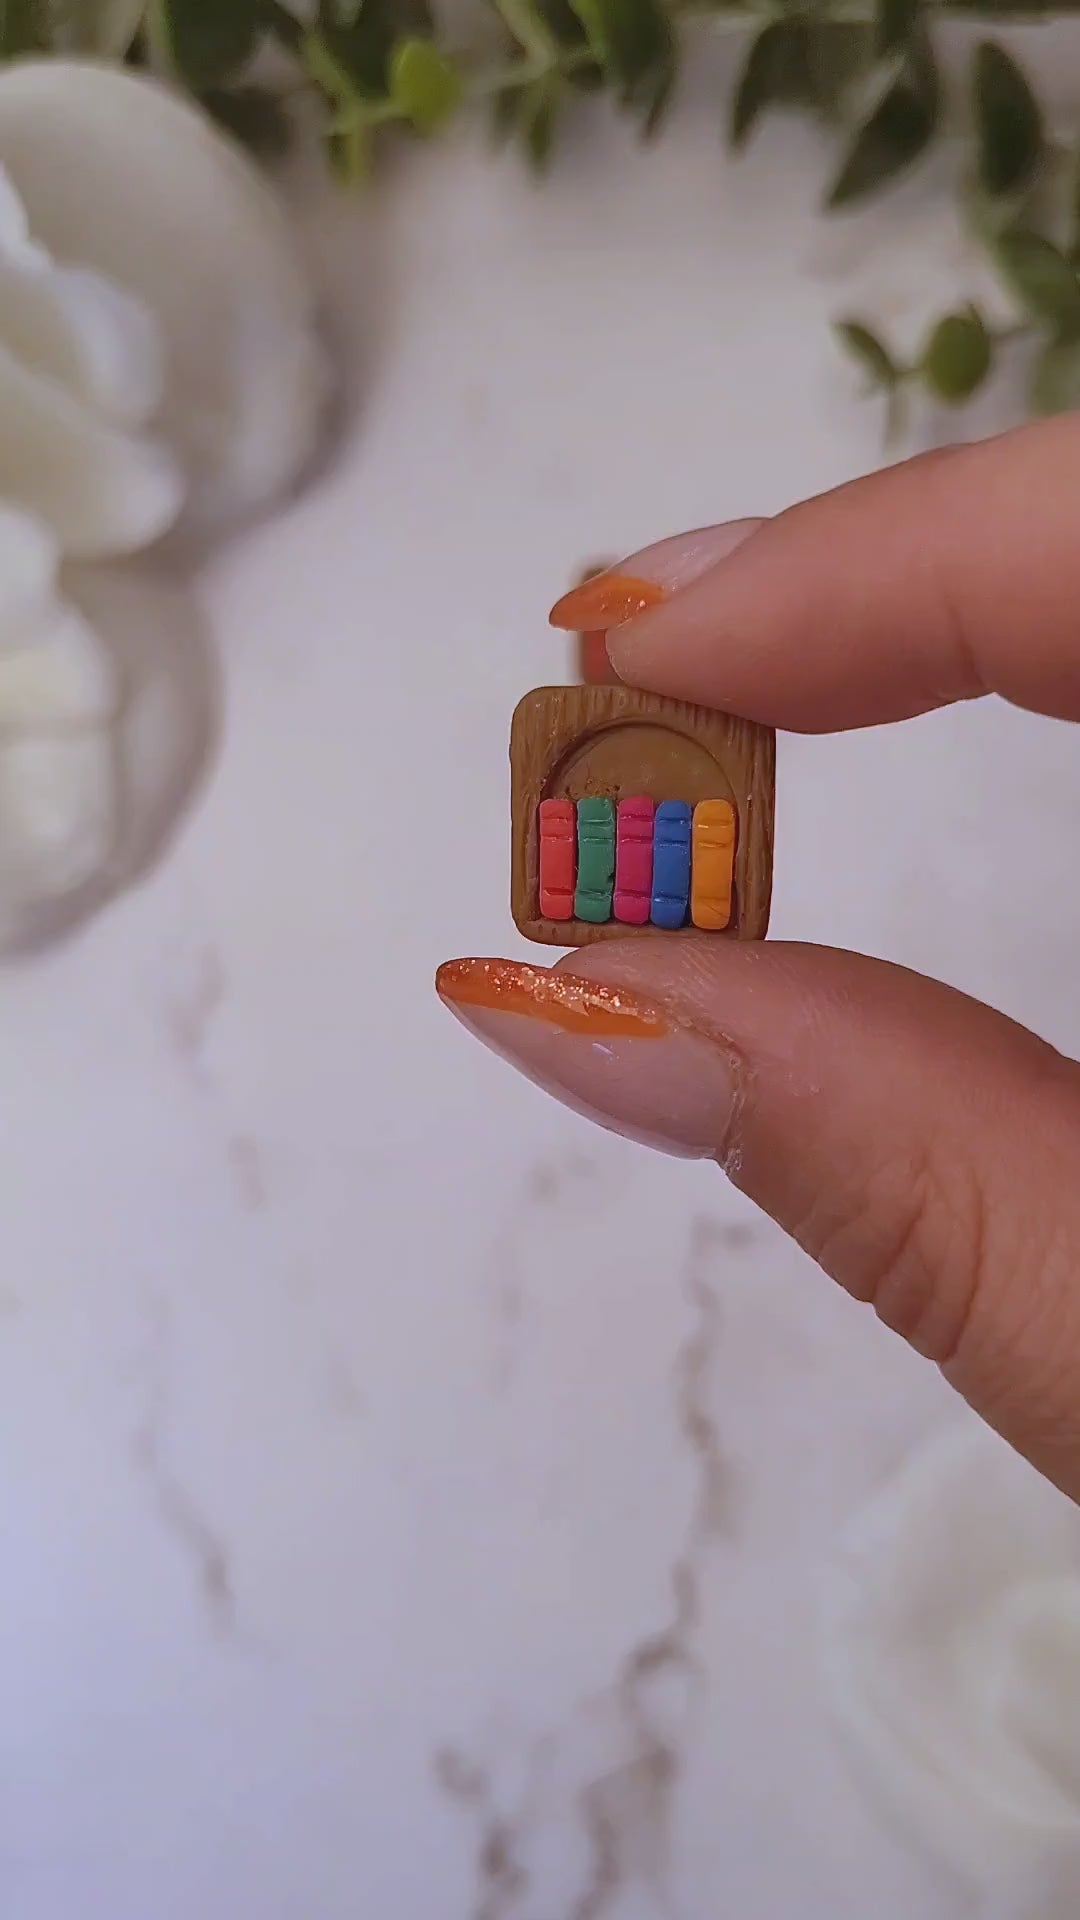 video close up of bookshelf stud made of polymer clay